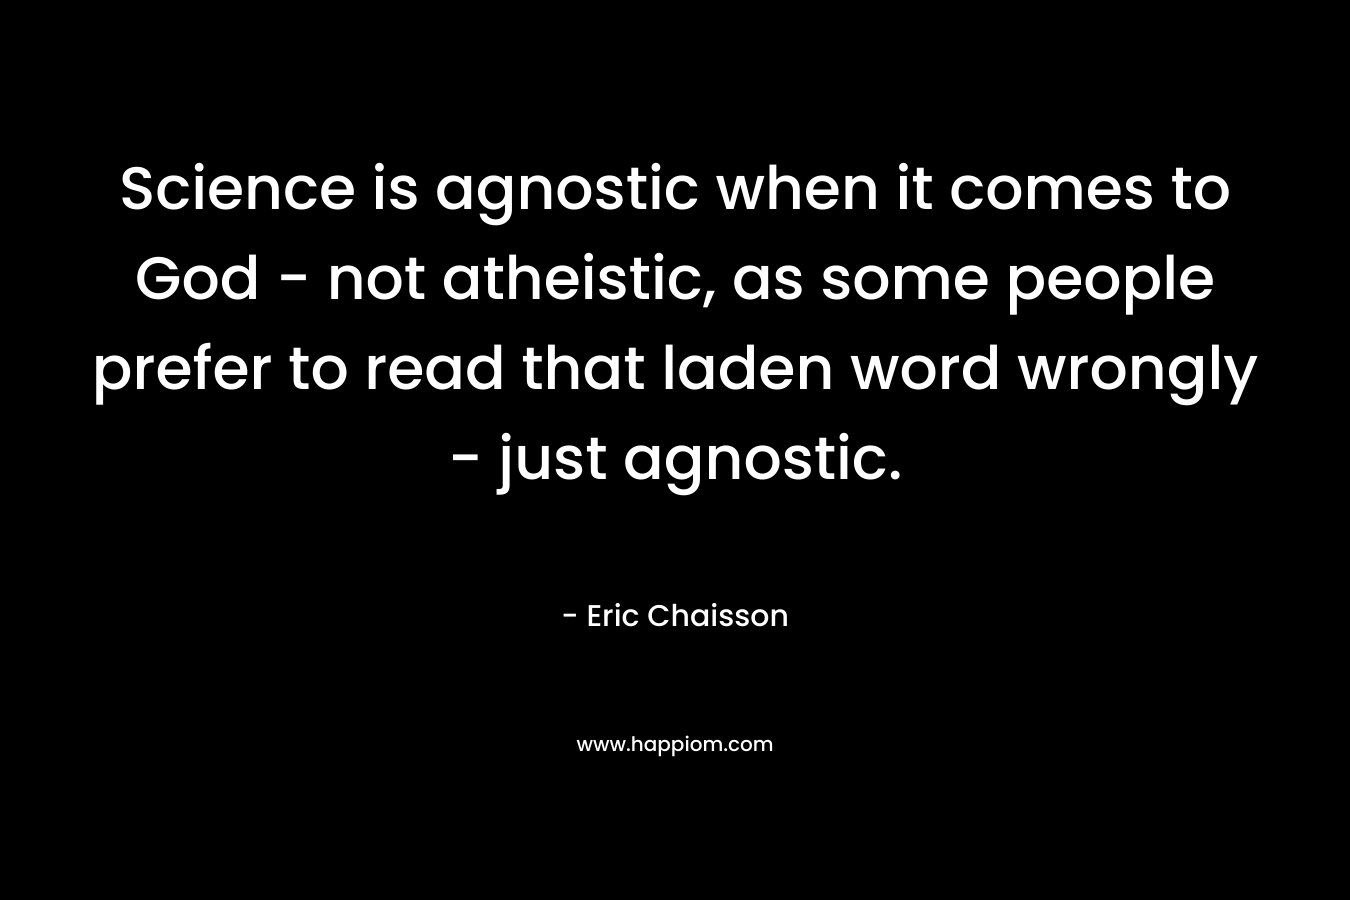 Science is agnostic when it comes to God – not atheistic, as some people prefer to read that laden word wrongly – just agnostic. – Eric Chaisson